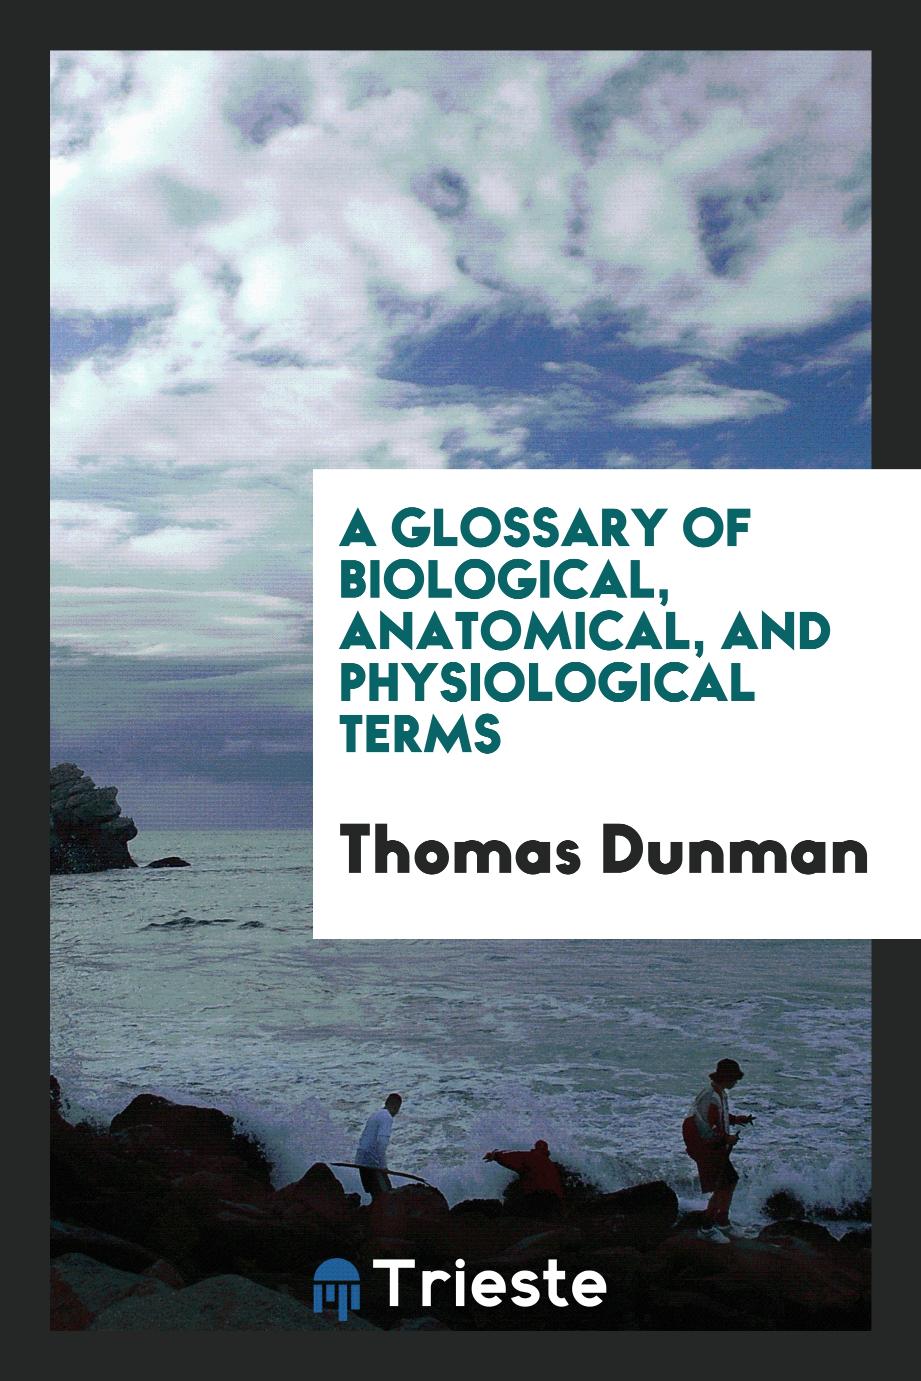 A Glossary of Biological, Anatomical, and Physiological Terms